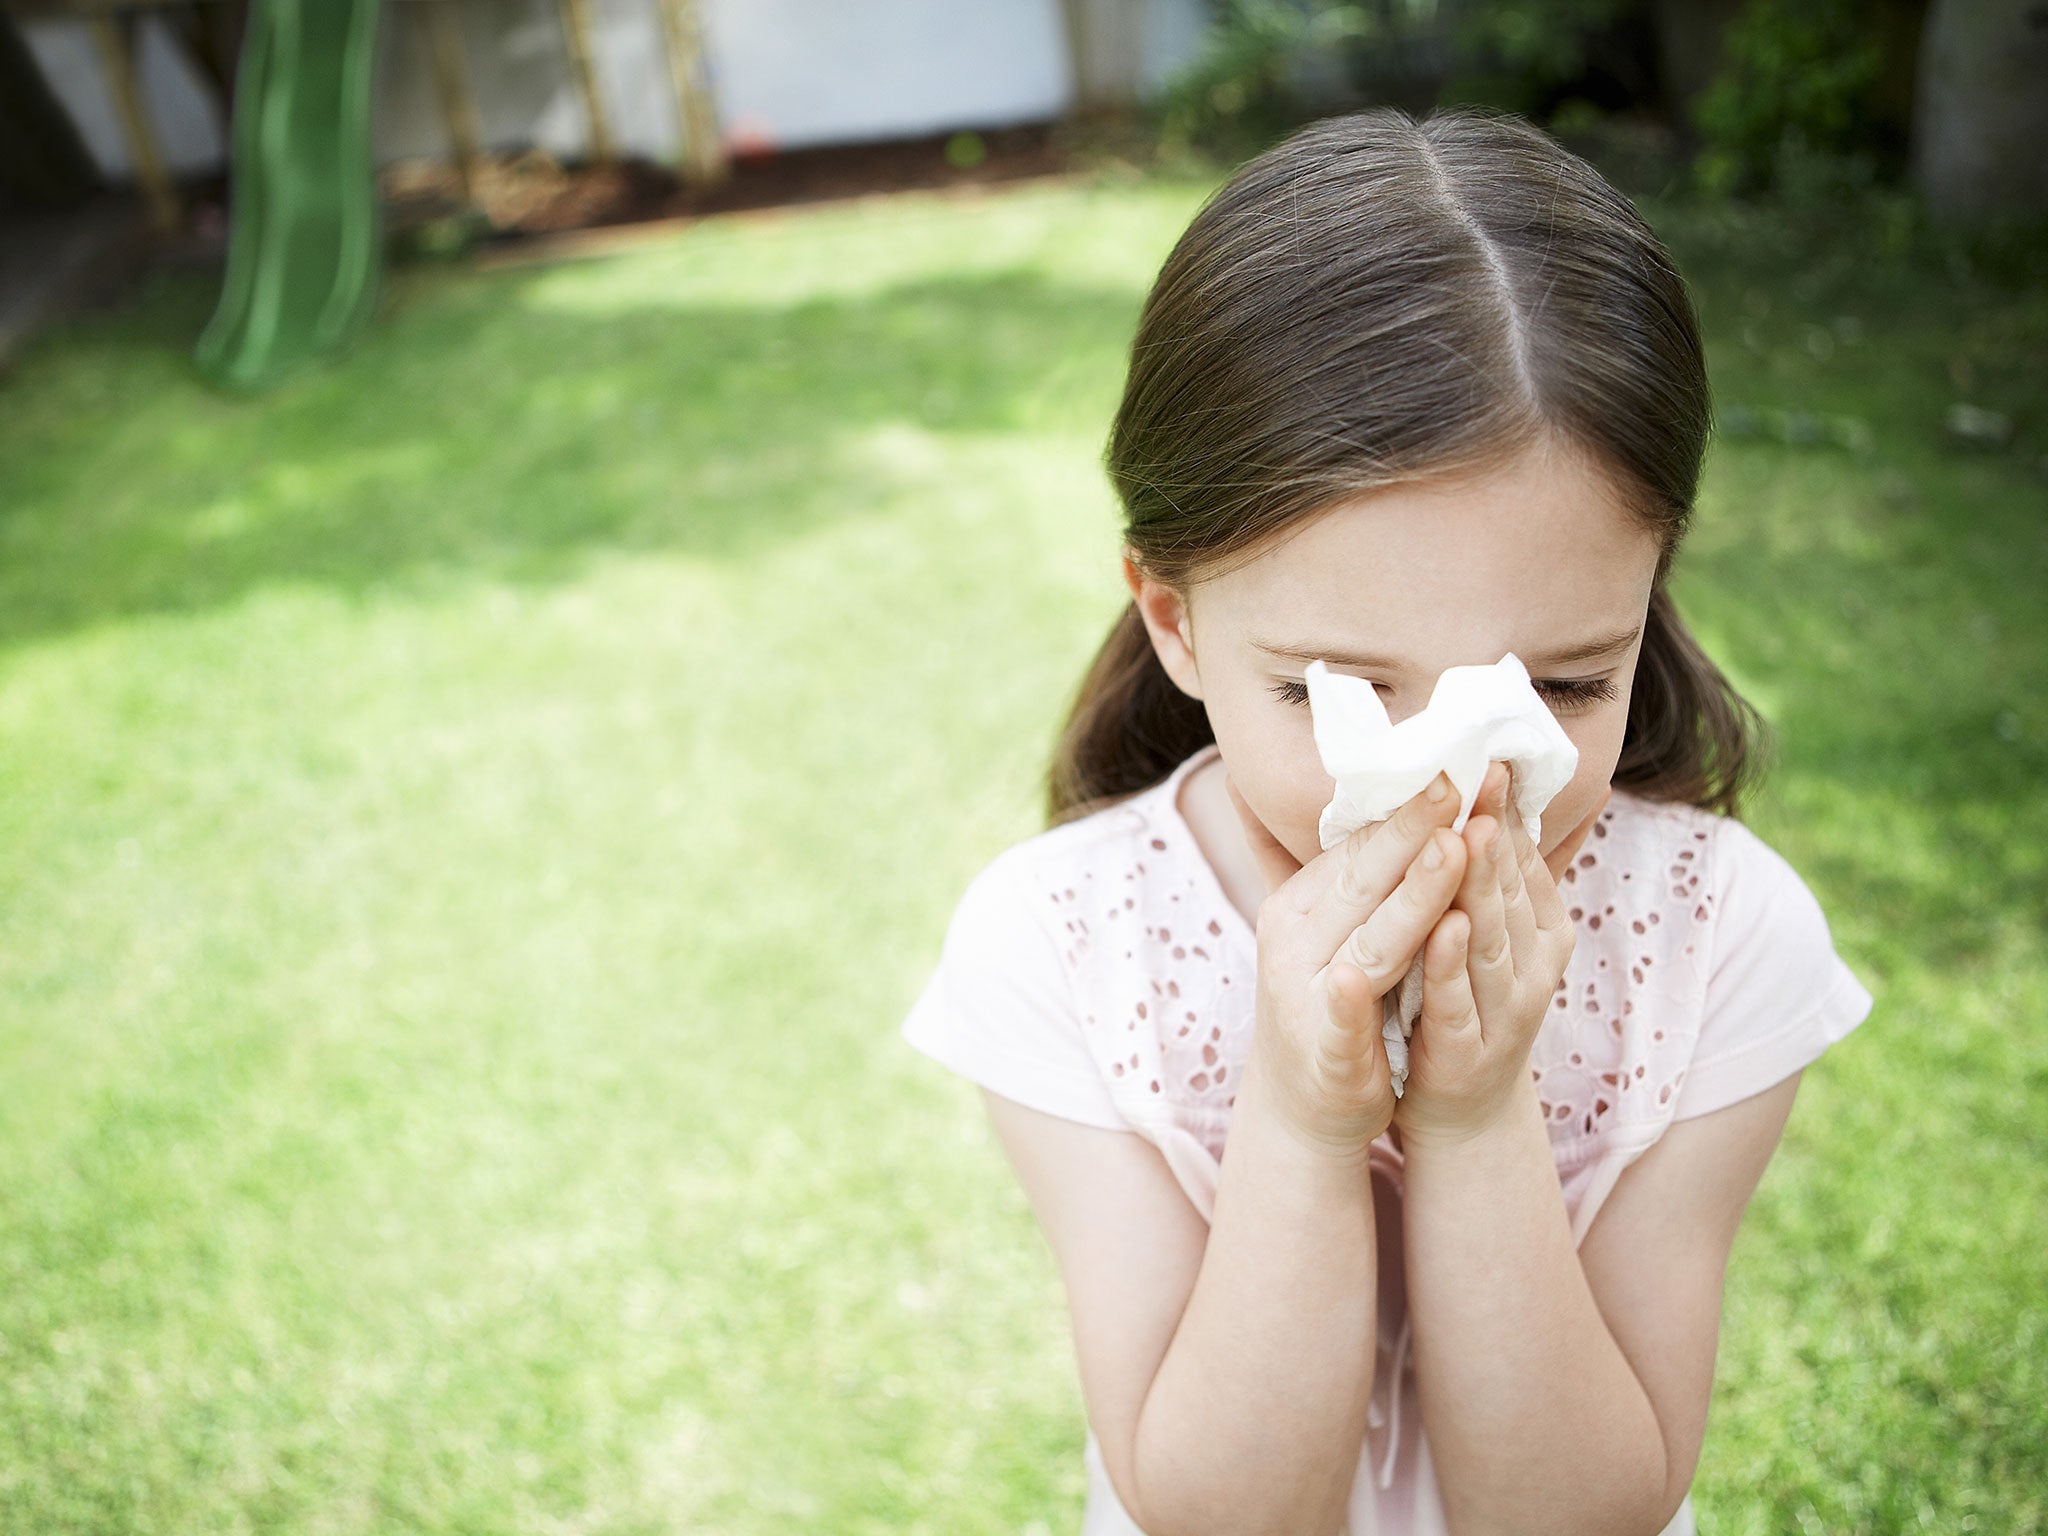 Several hundred children in at least 10 US states have been treated for respiratory illnesses believed to have been cause by a rare and potentially fatal virus related to the common cold